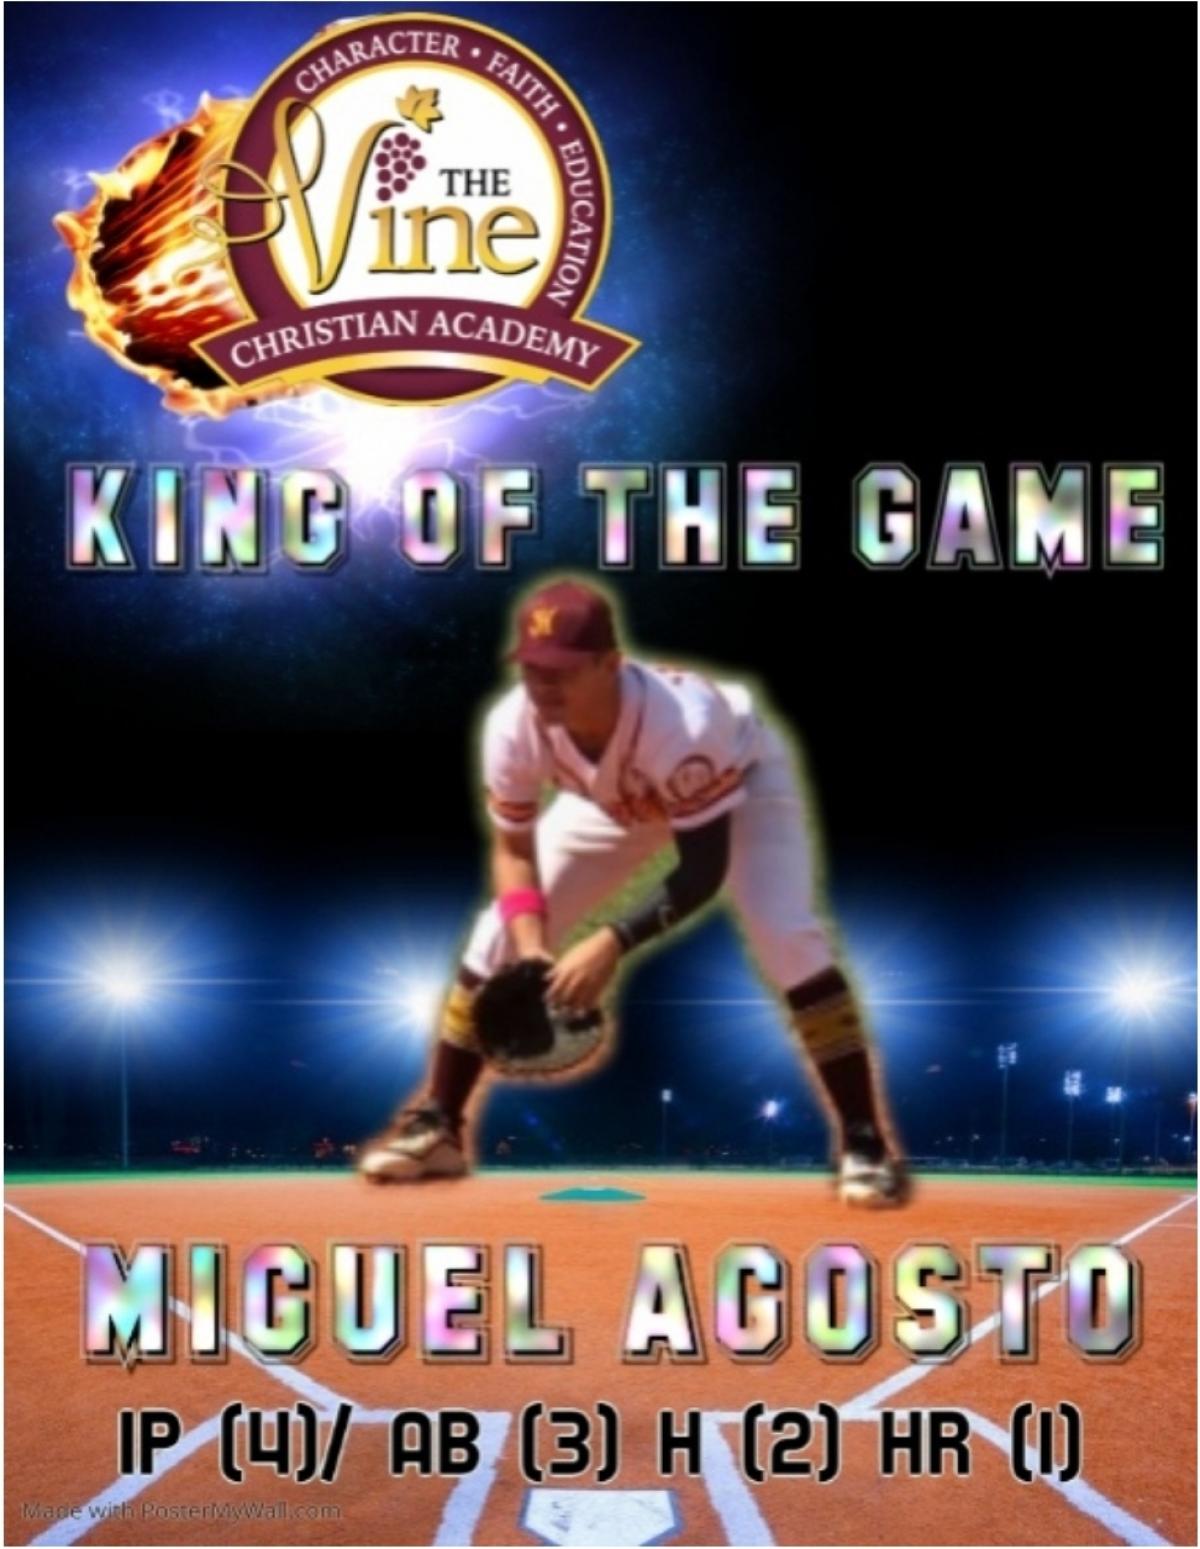 King of the game 03/02/2020